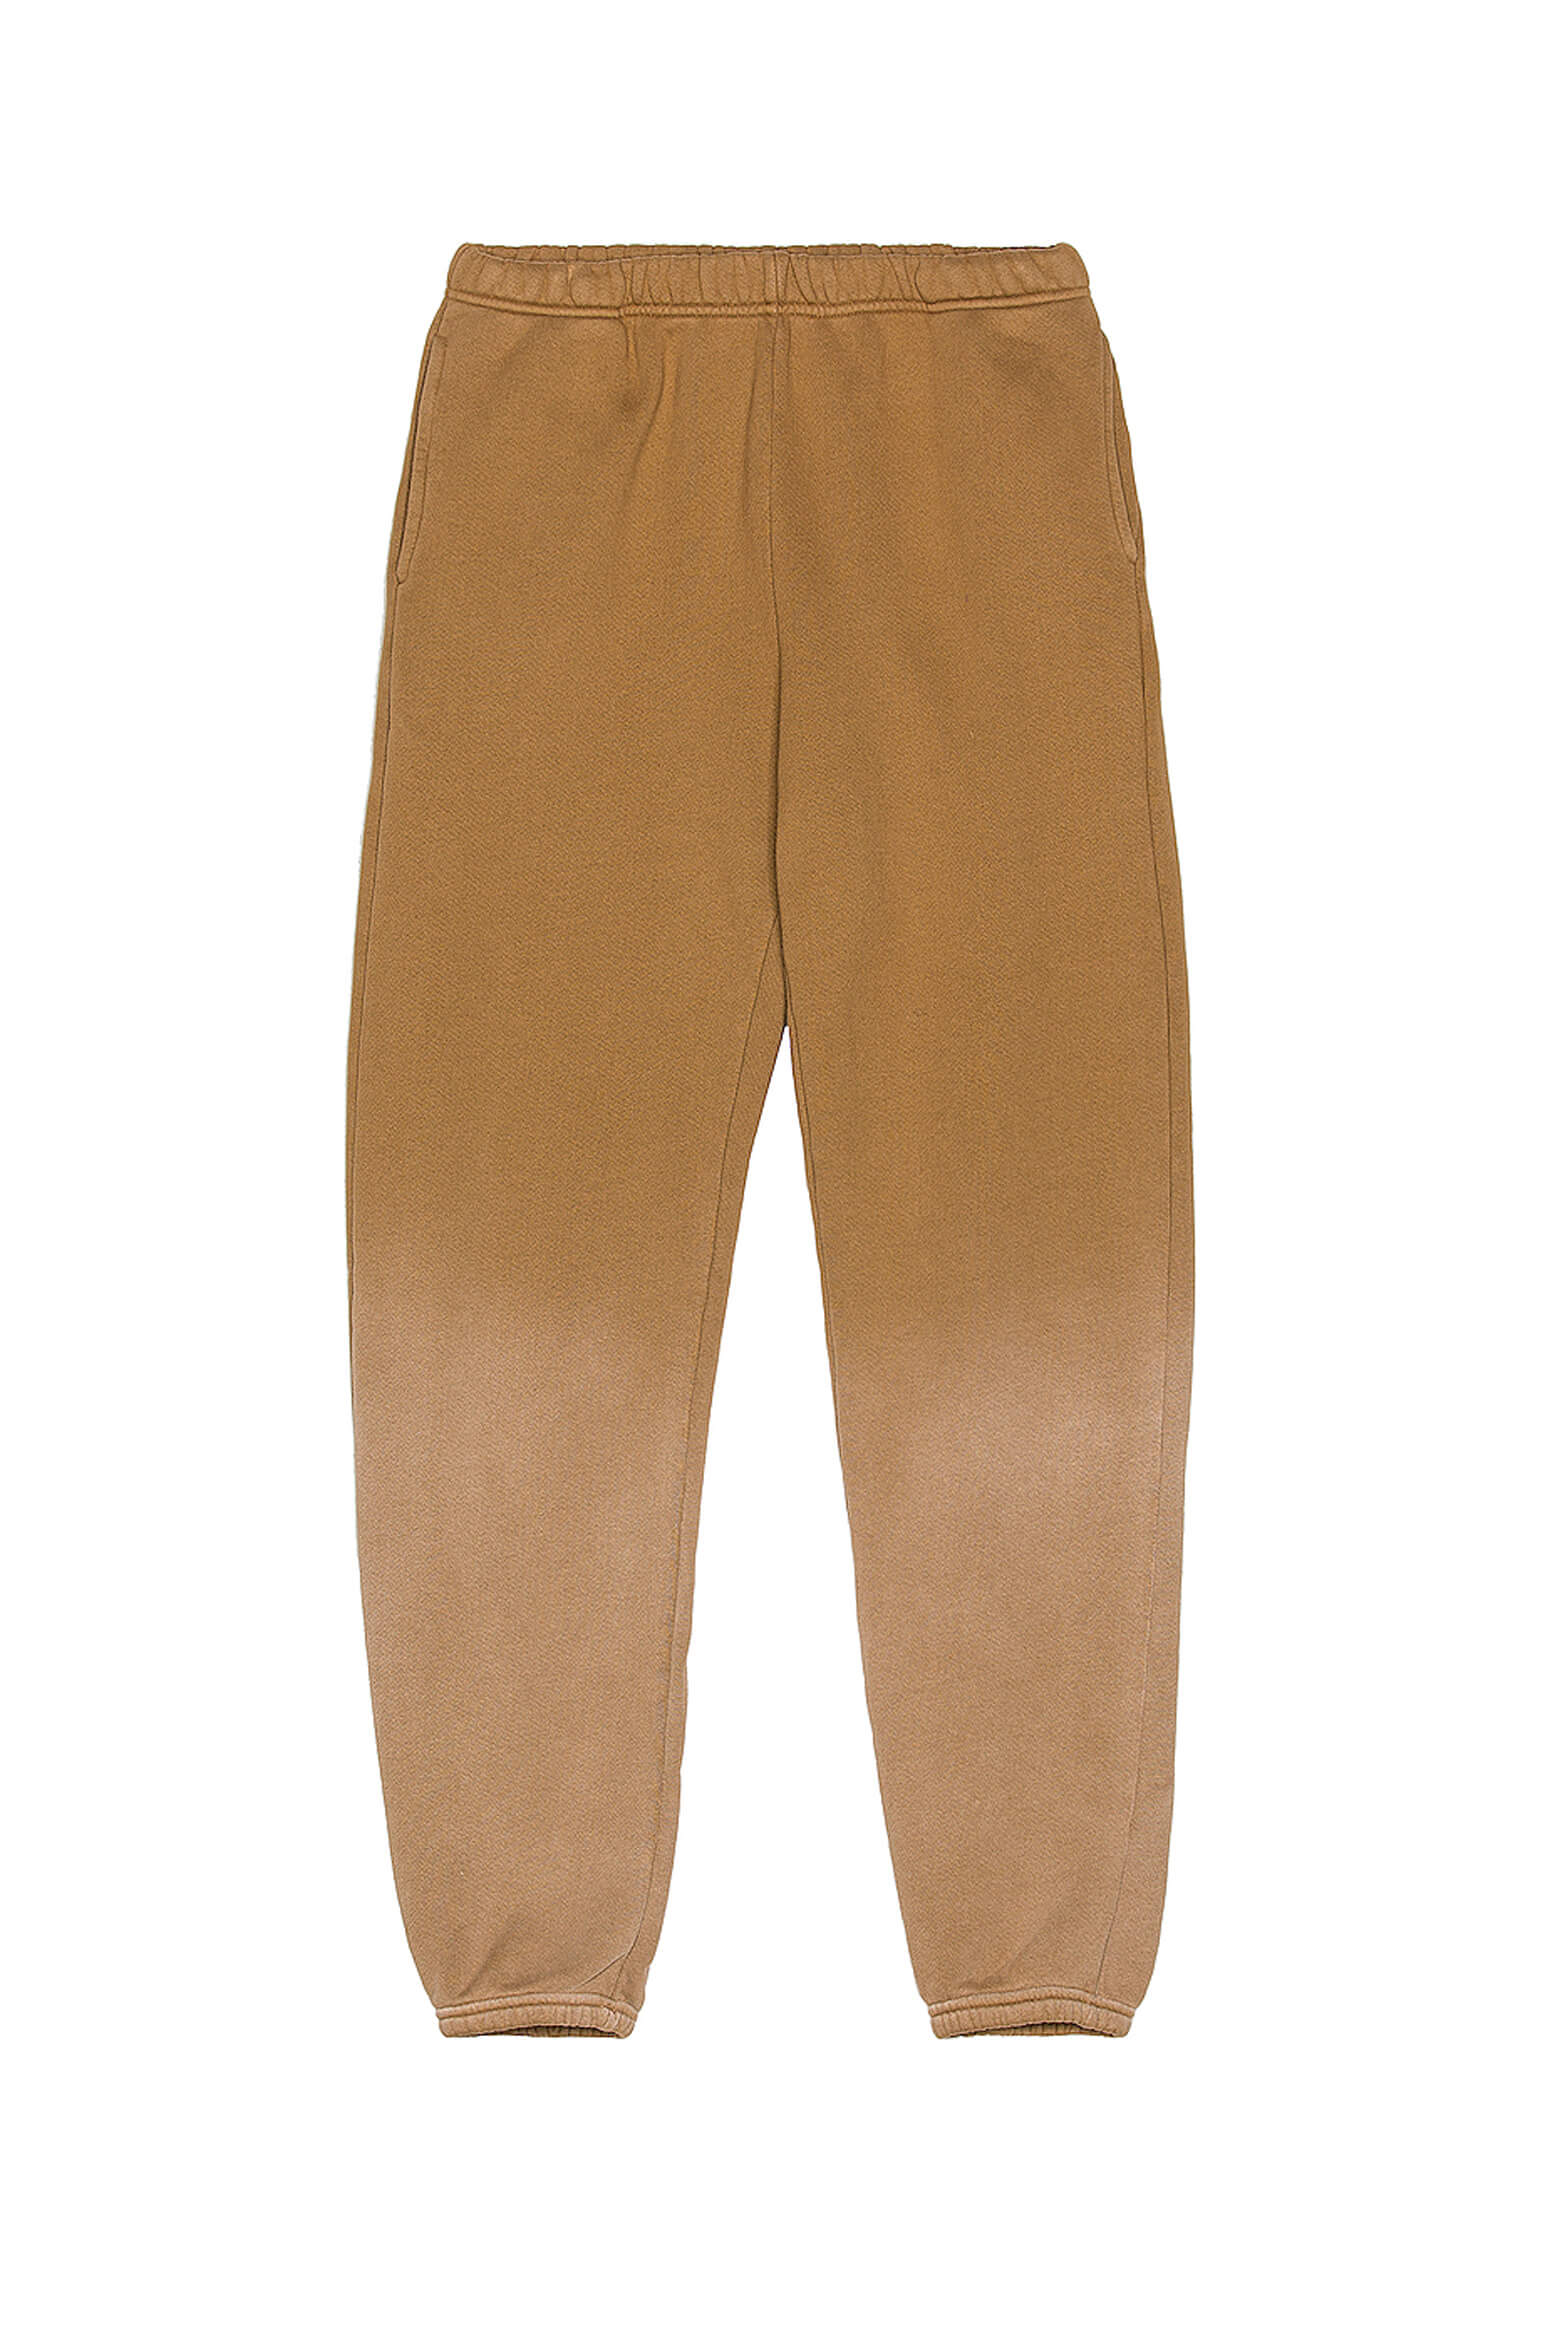 Les Tien Classic Sweatpants in Sand Ombre from The New Trend